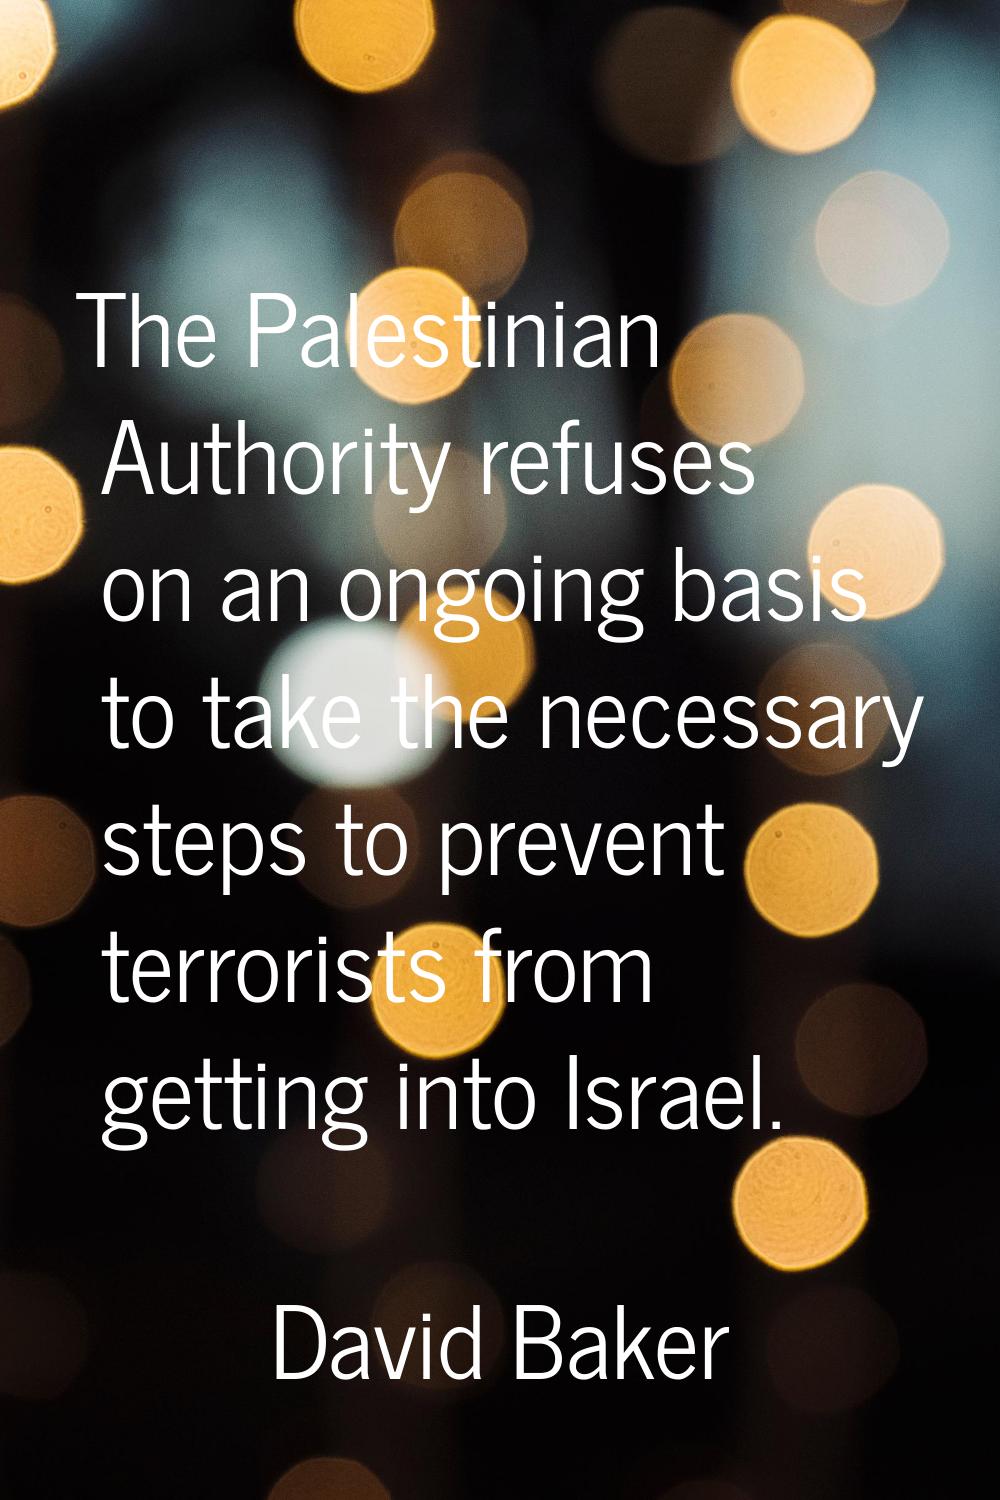 The Palestinian Authority refuses on an ongoing basis to take the necessary steps to prevent terror